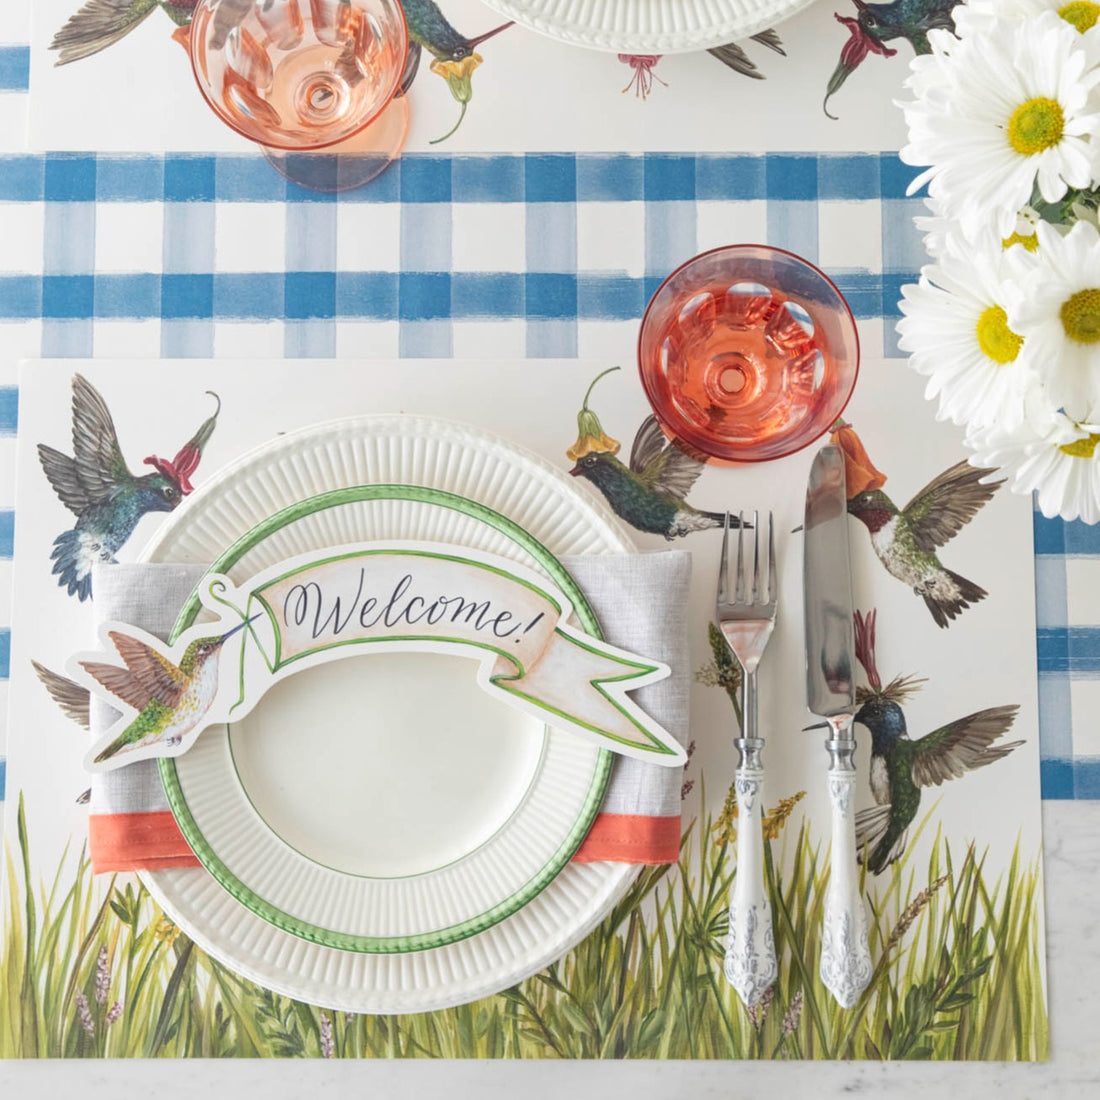 Top-down view of a springtime place setting featuring a Hummingbird Banner Table Accent with &quot;Welcome!&quot; written on it resting on the plate.